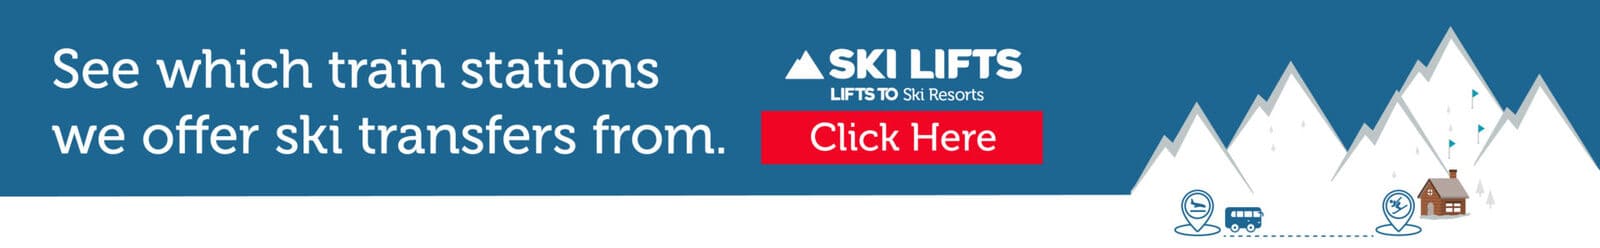 ski-lifts book now